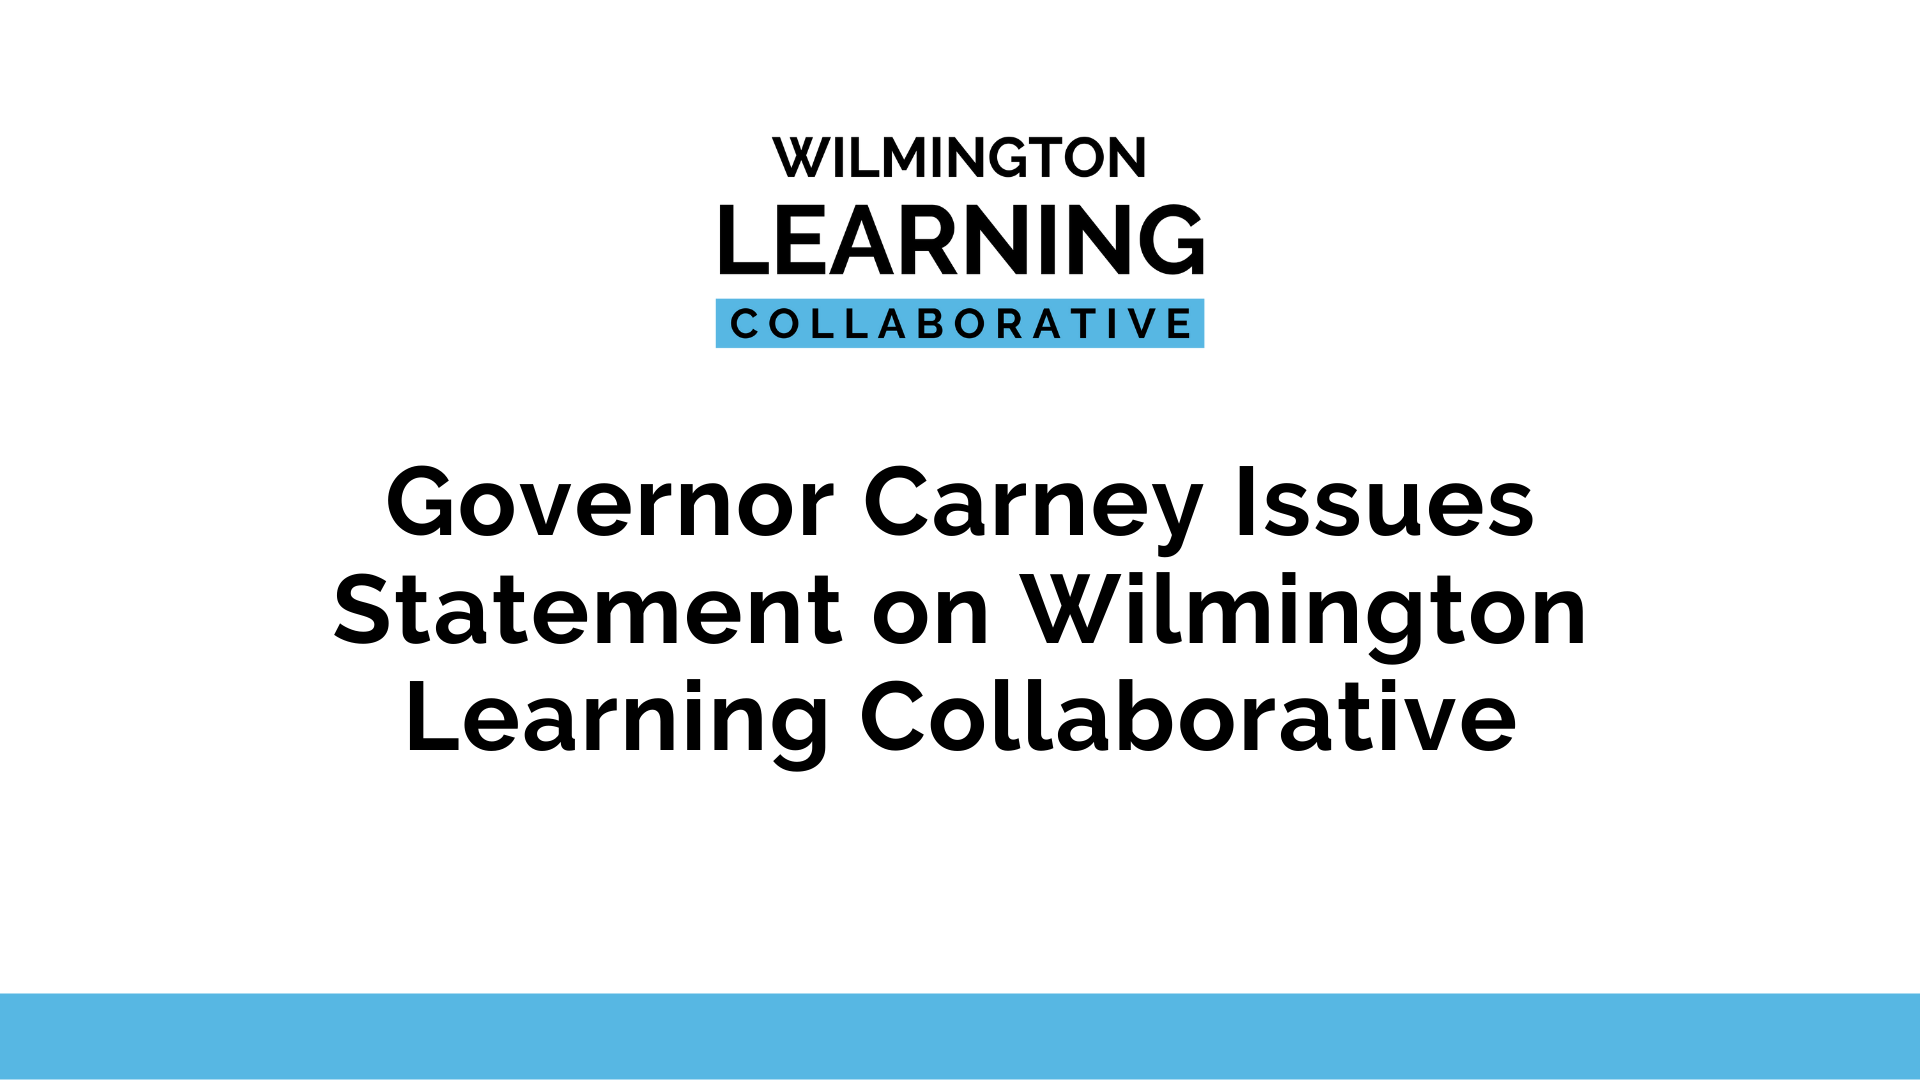 Governor Carney Issues Statement on Wilmington Learning Collaborative